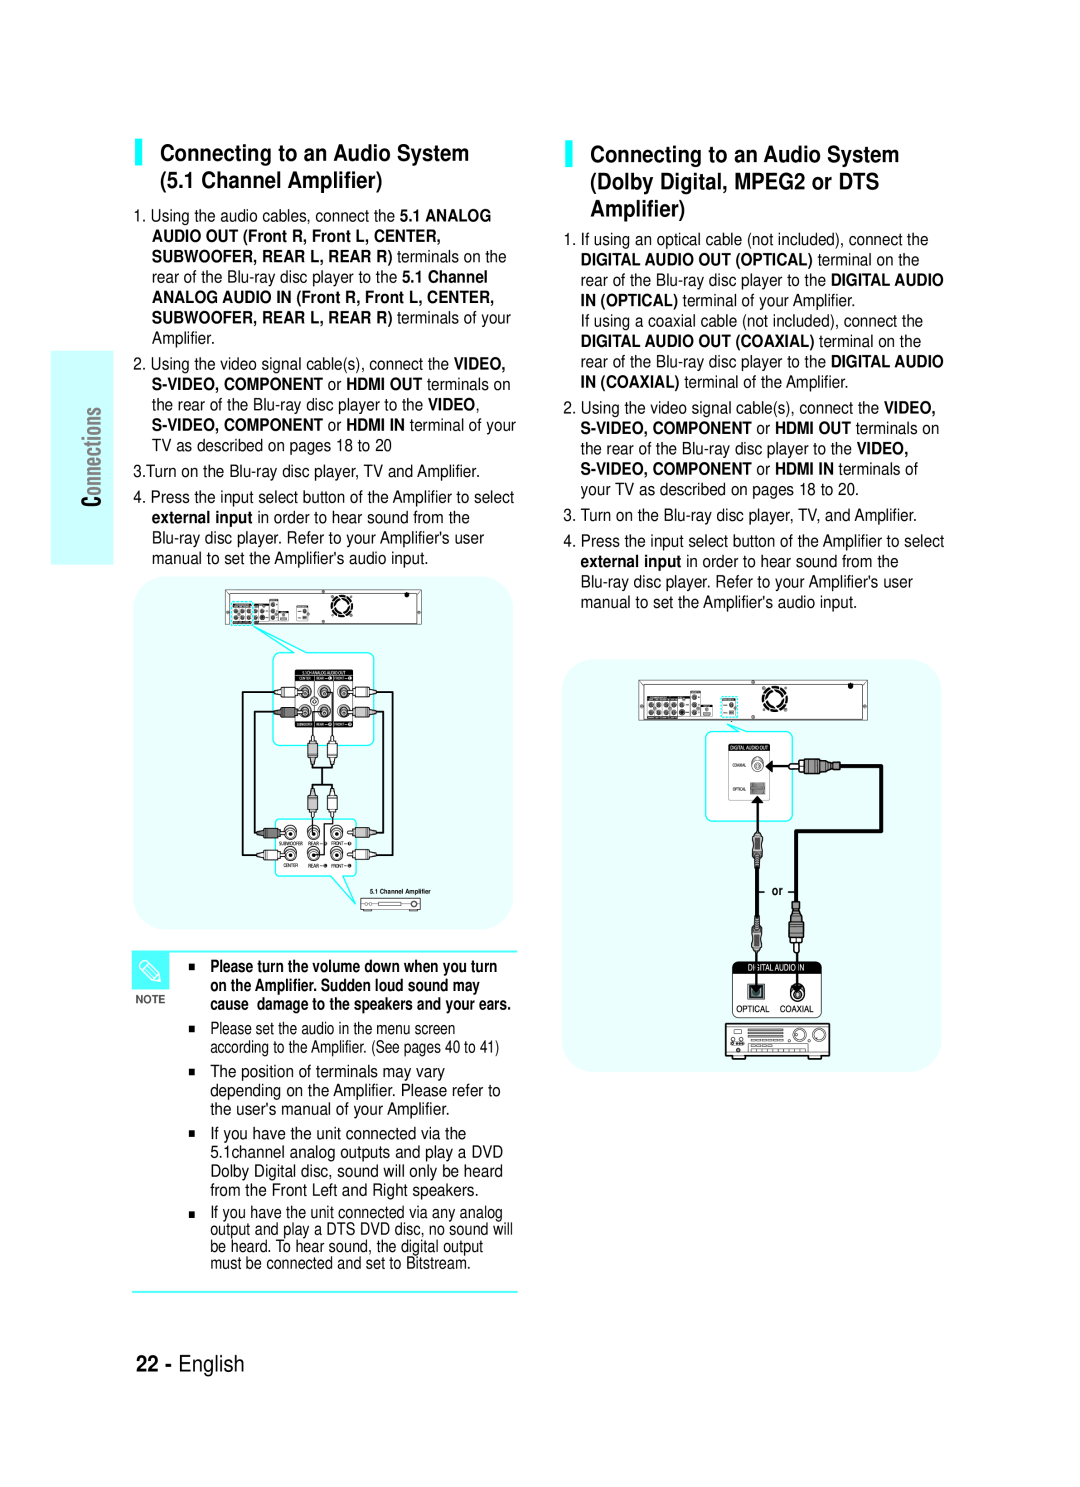 Samsung BD-P1000/XEO manual Connecting to an Audio System Dolby Digital, MPEG2 or DTS Amplifier, English, Connections 